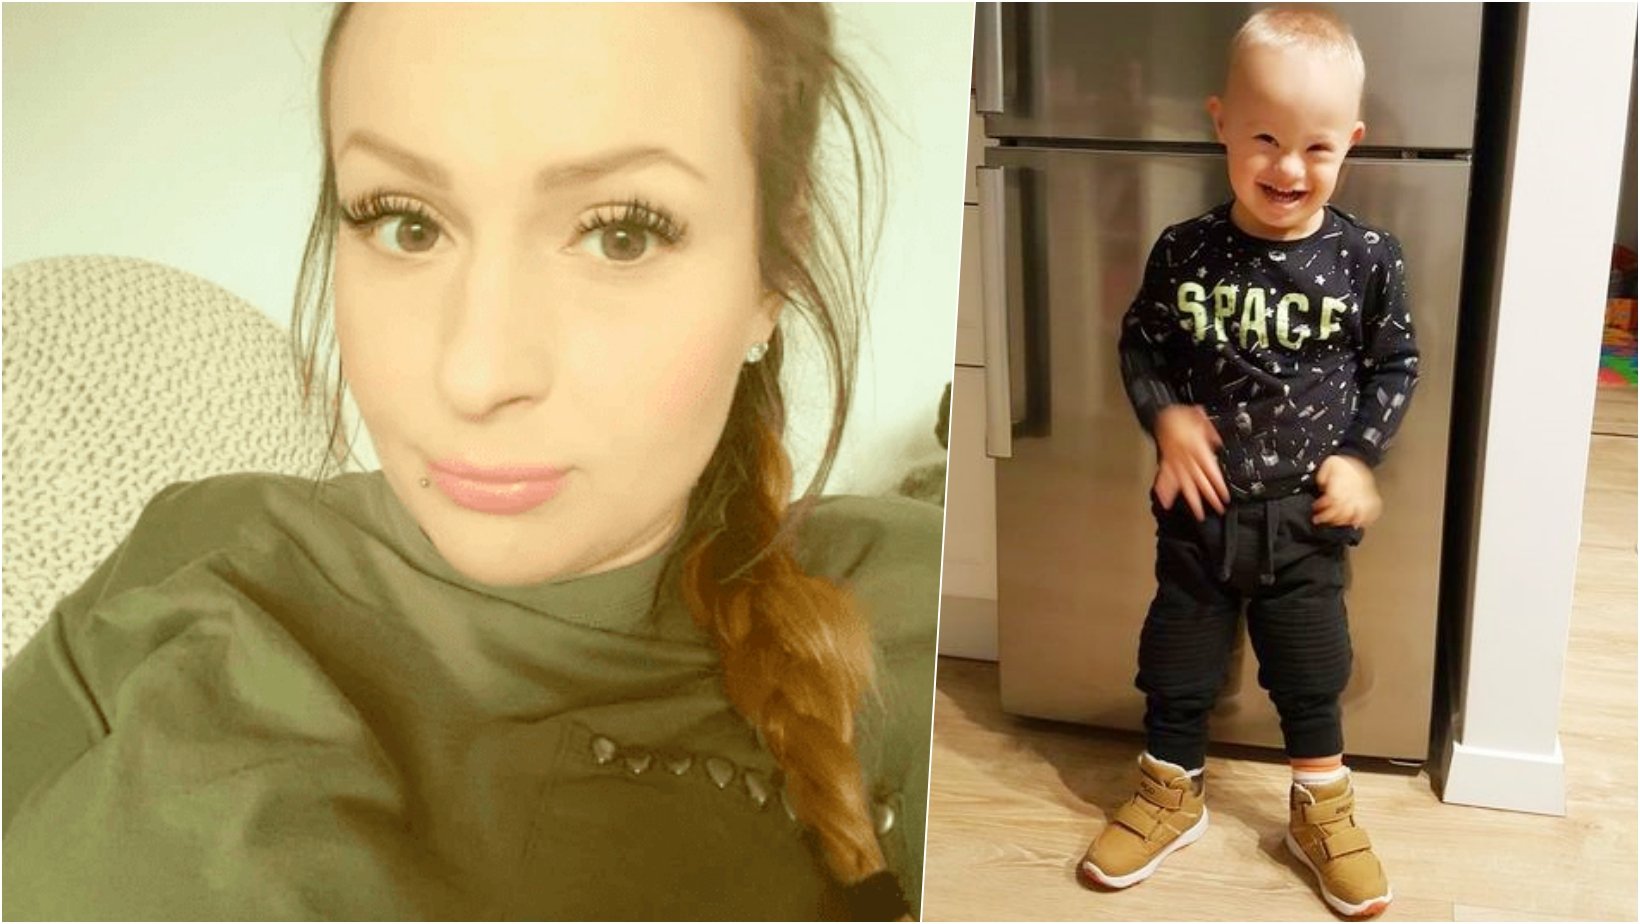 6 facebook cover 10.jpg?resize=1200,630 - Mom Is Lambasted Online After Saying She Would Have Go For Abortion If She Knew Her Child Had Down Syndrome